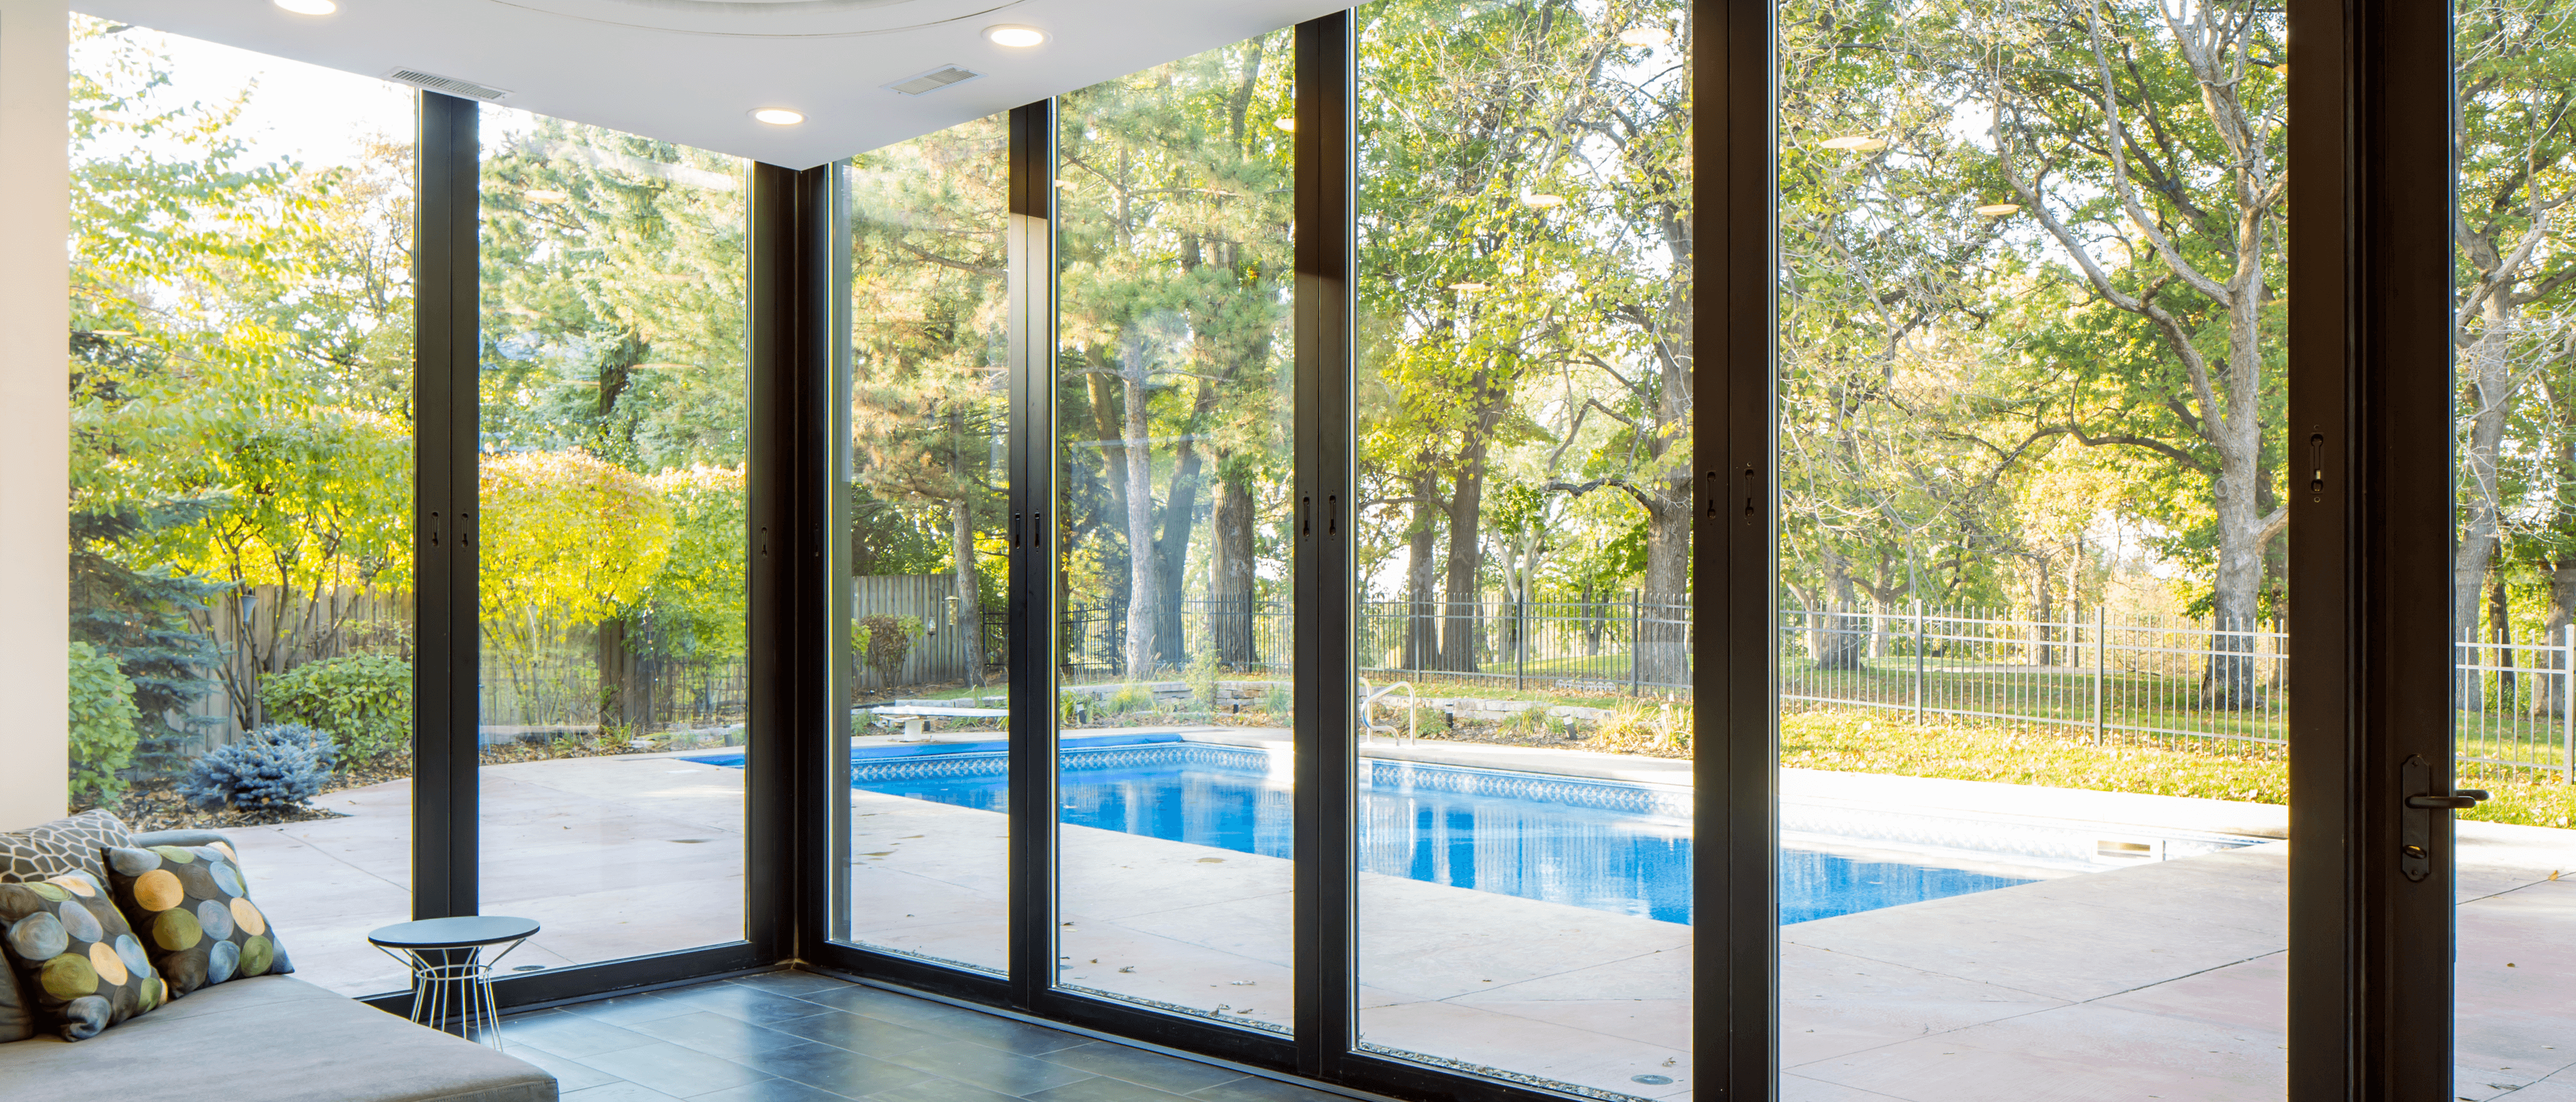 Aluminum Stacking Glass Wall - Residential